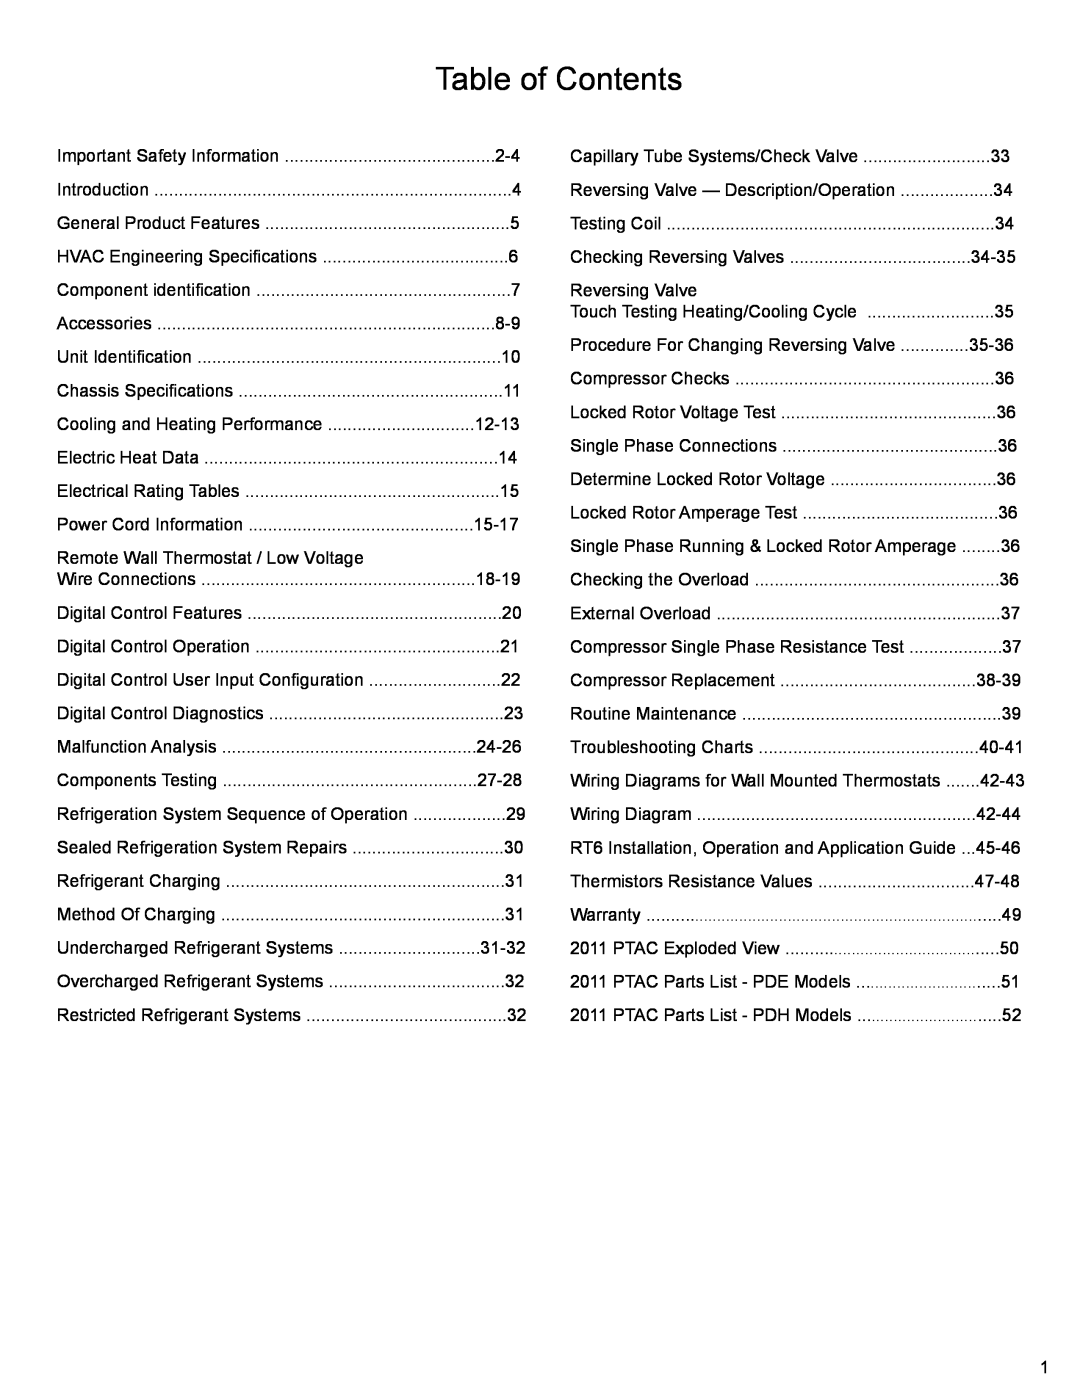 Friedrich PTAC - R410A service manual Table of Contents 